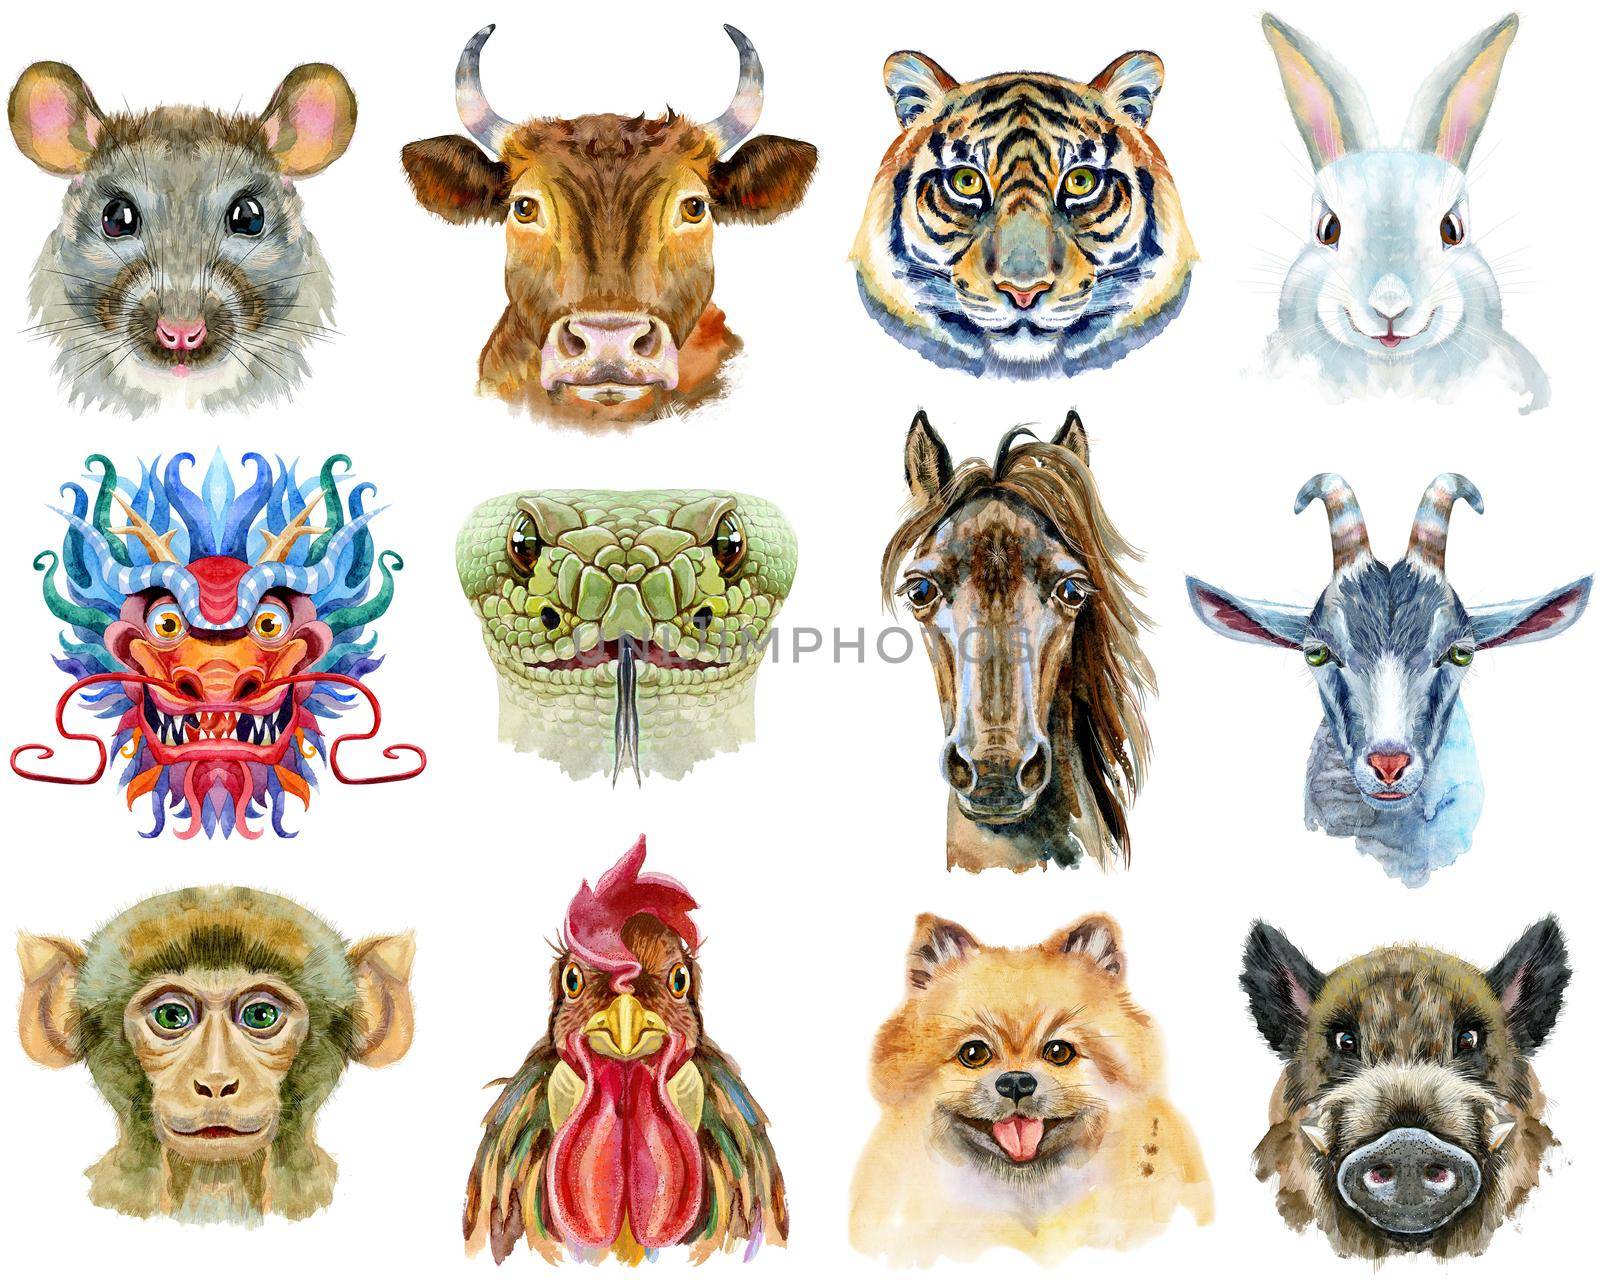 Colorful astrology set with drawings of twelve chinese zodiac animals isolated on white. Watercolor holiday collection of new year calendar and horoscope symbols.